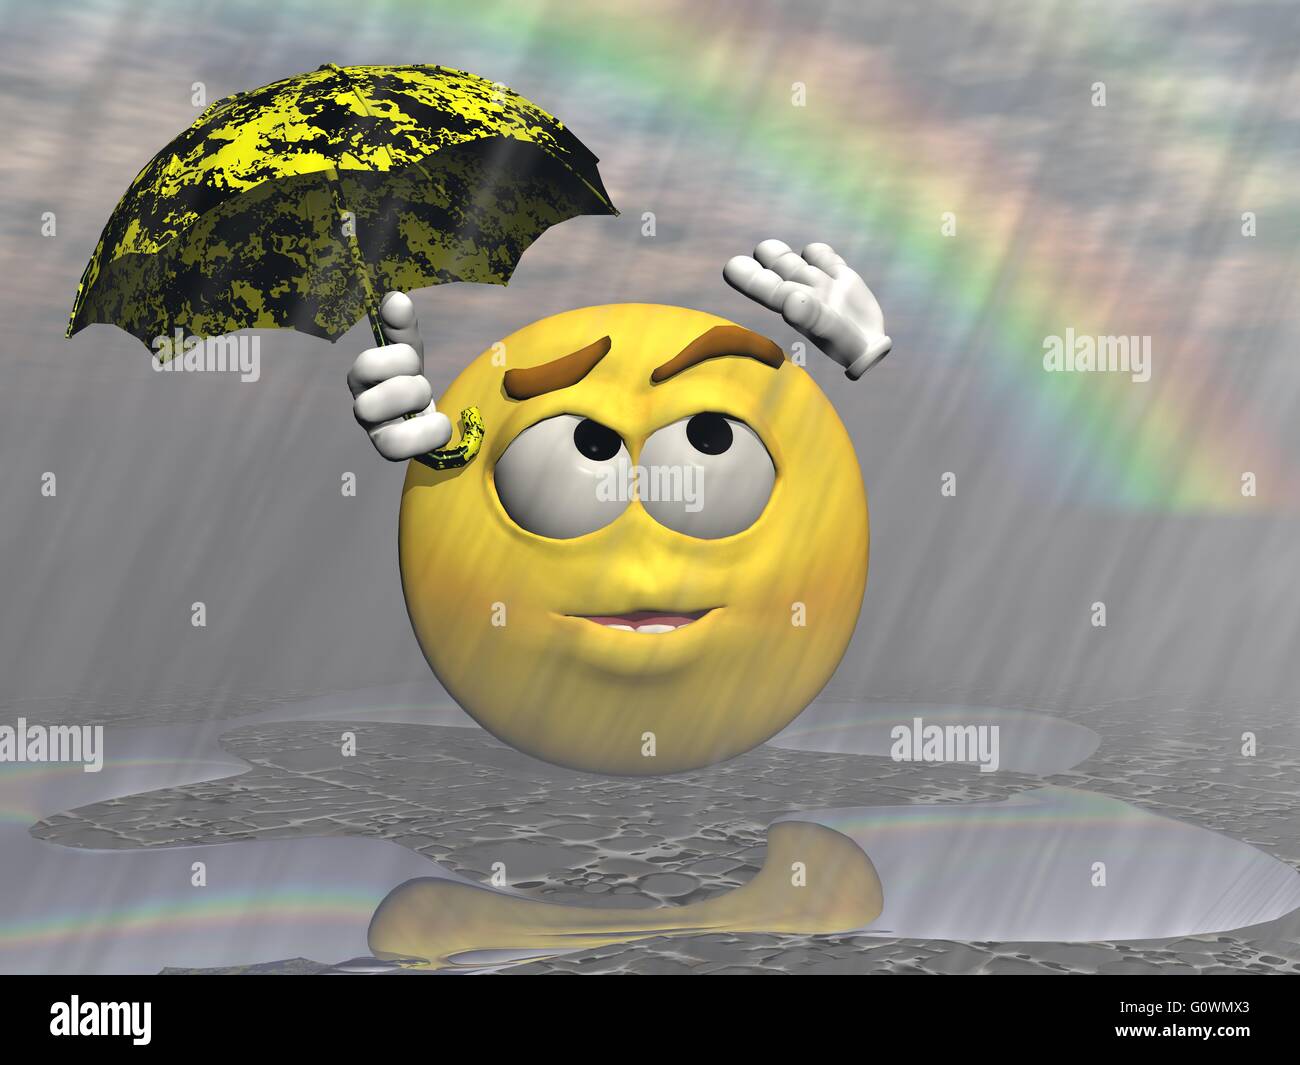 Emoticon Umbrella 3d Render High Resolution Stock Photography and Images -  Alamy